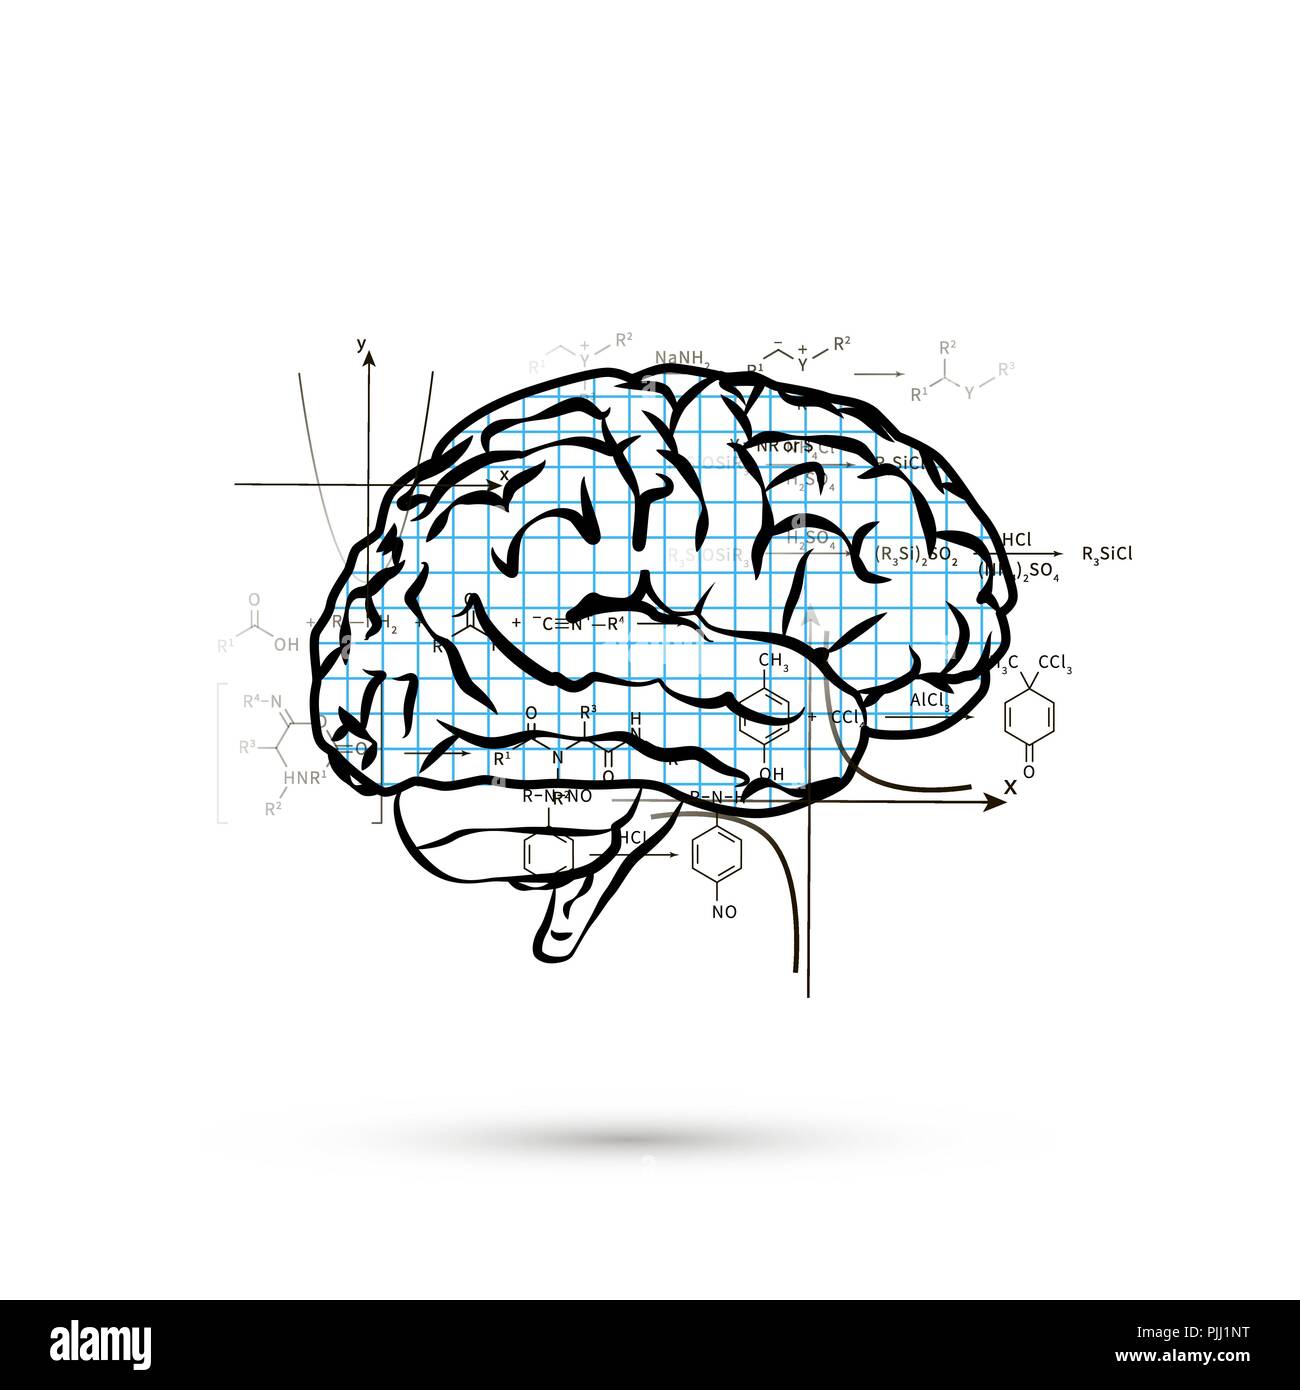 Draw the diagram of human brain. Explain its functions.